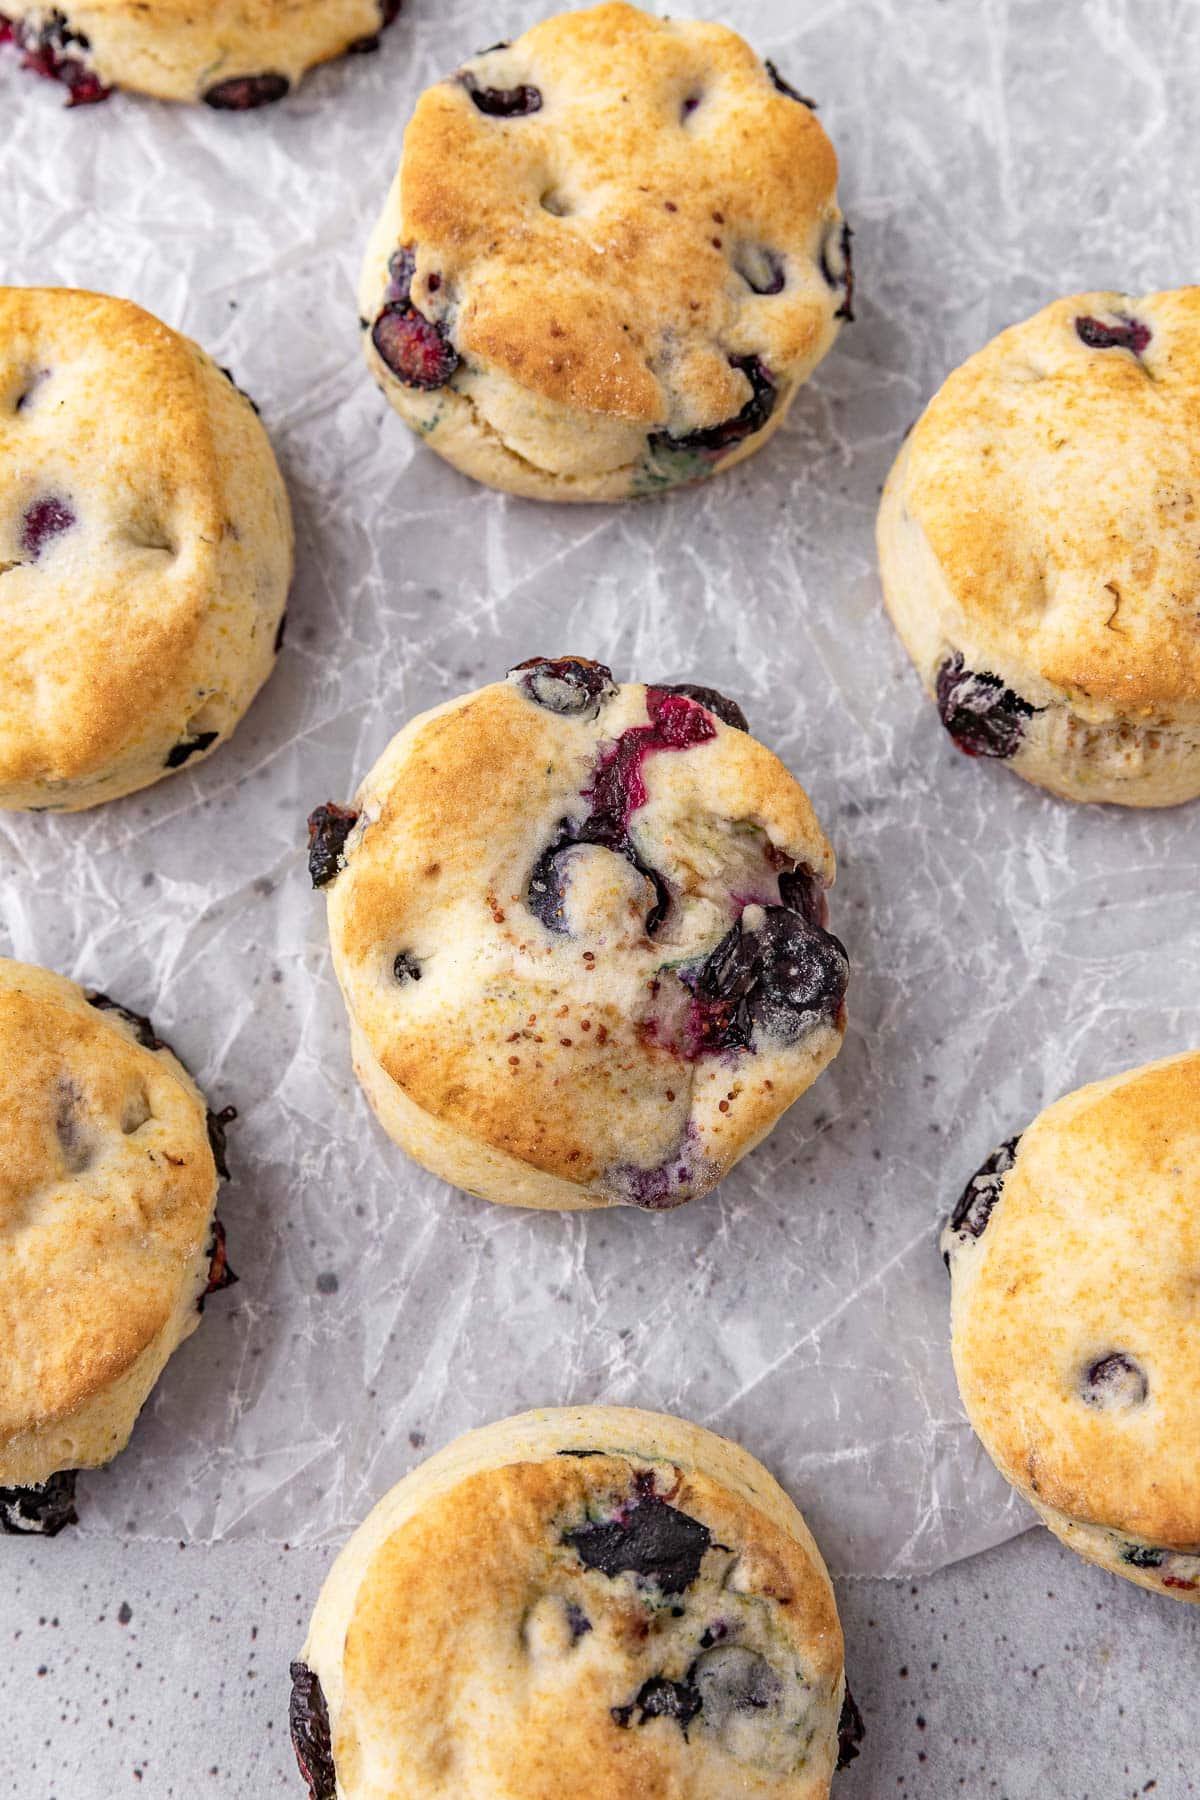 Lemon Blueberry Biscuits baked biscuits on parchment paper